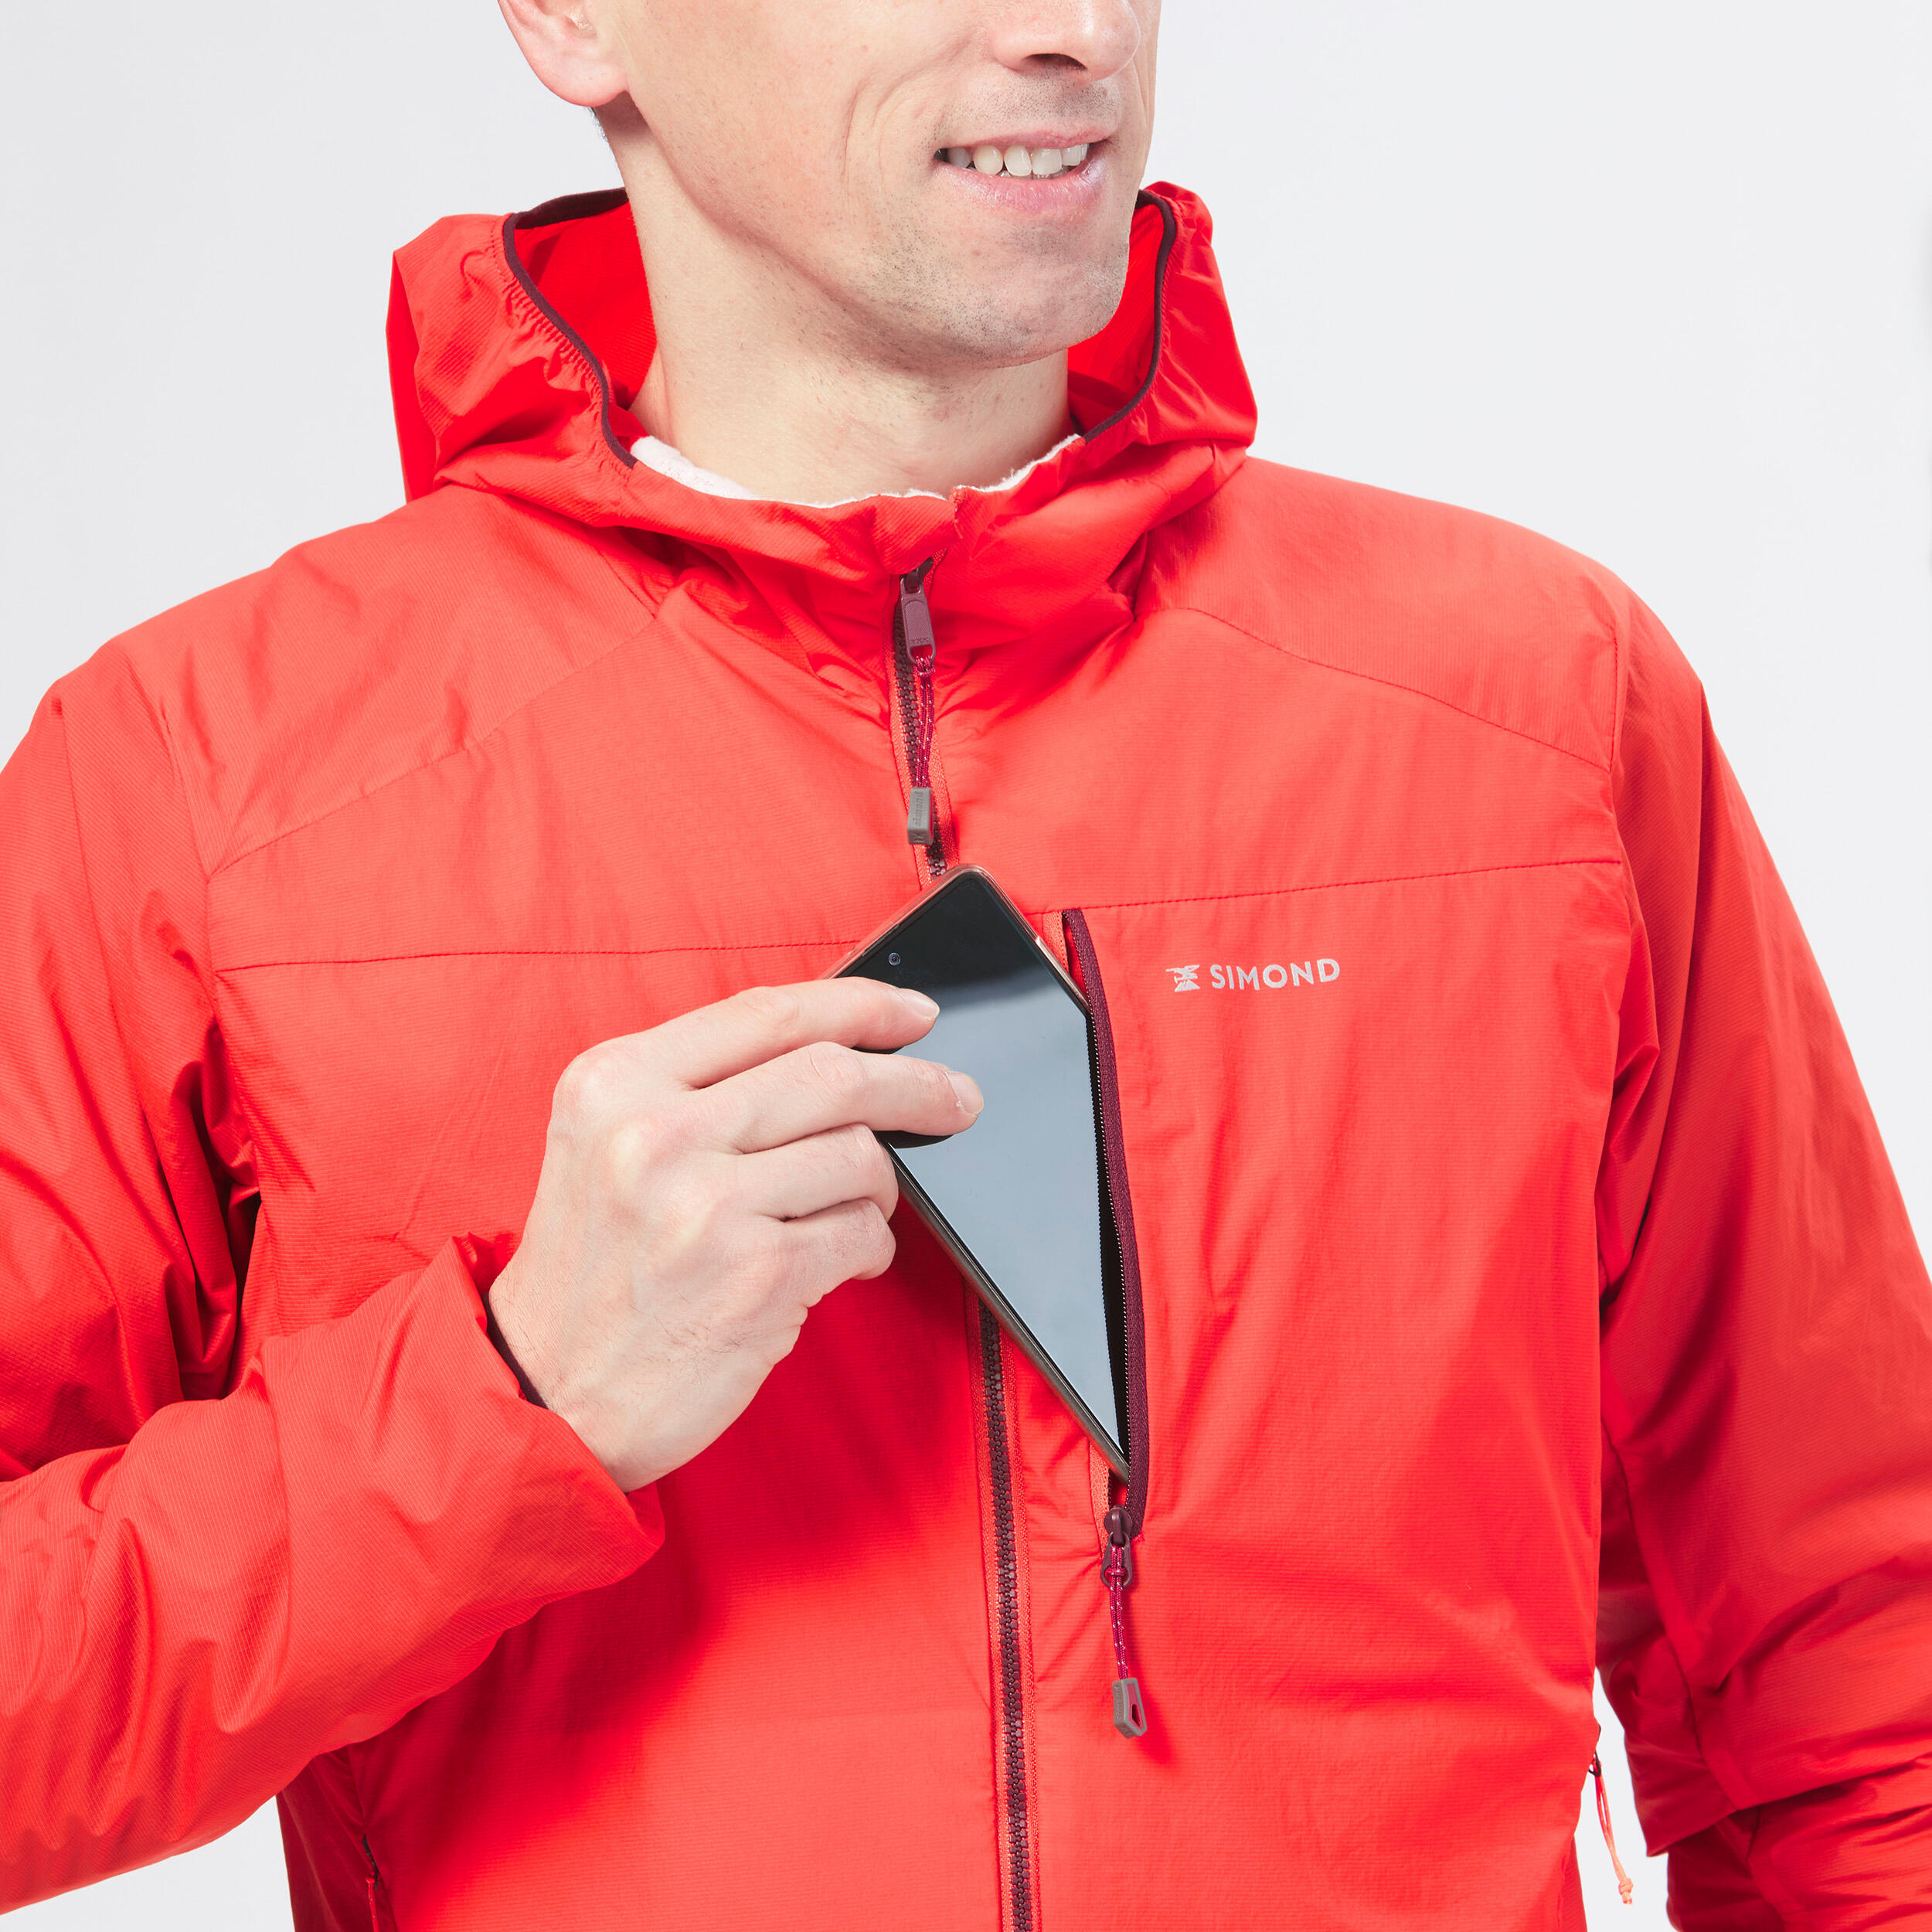 MEN'S WINDPROOF JACKET FOR MOUNTAINEERING - VERMILION RED 9/16